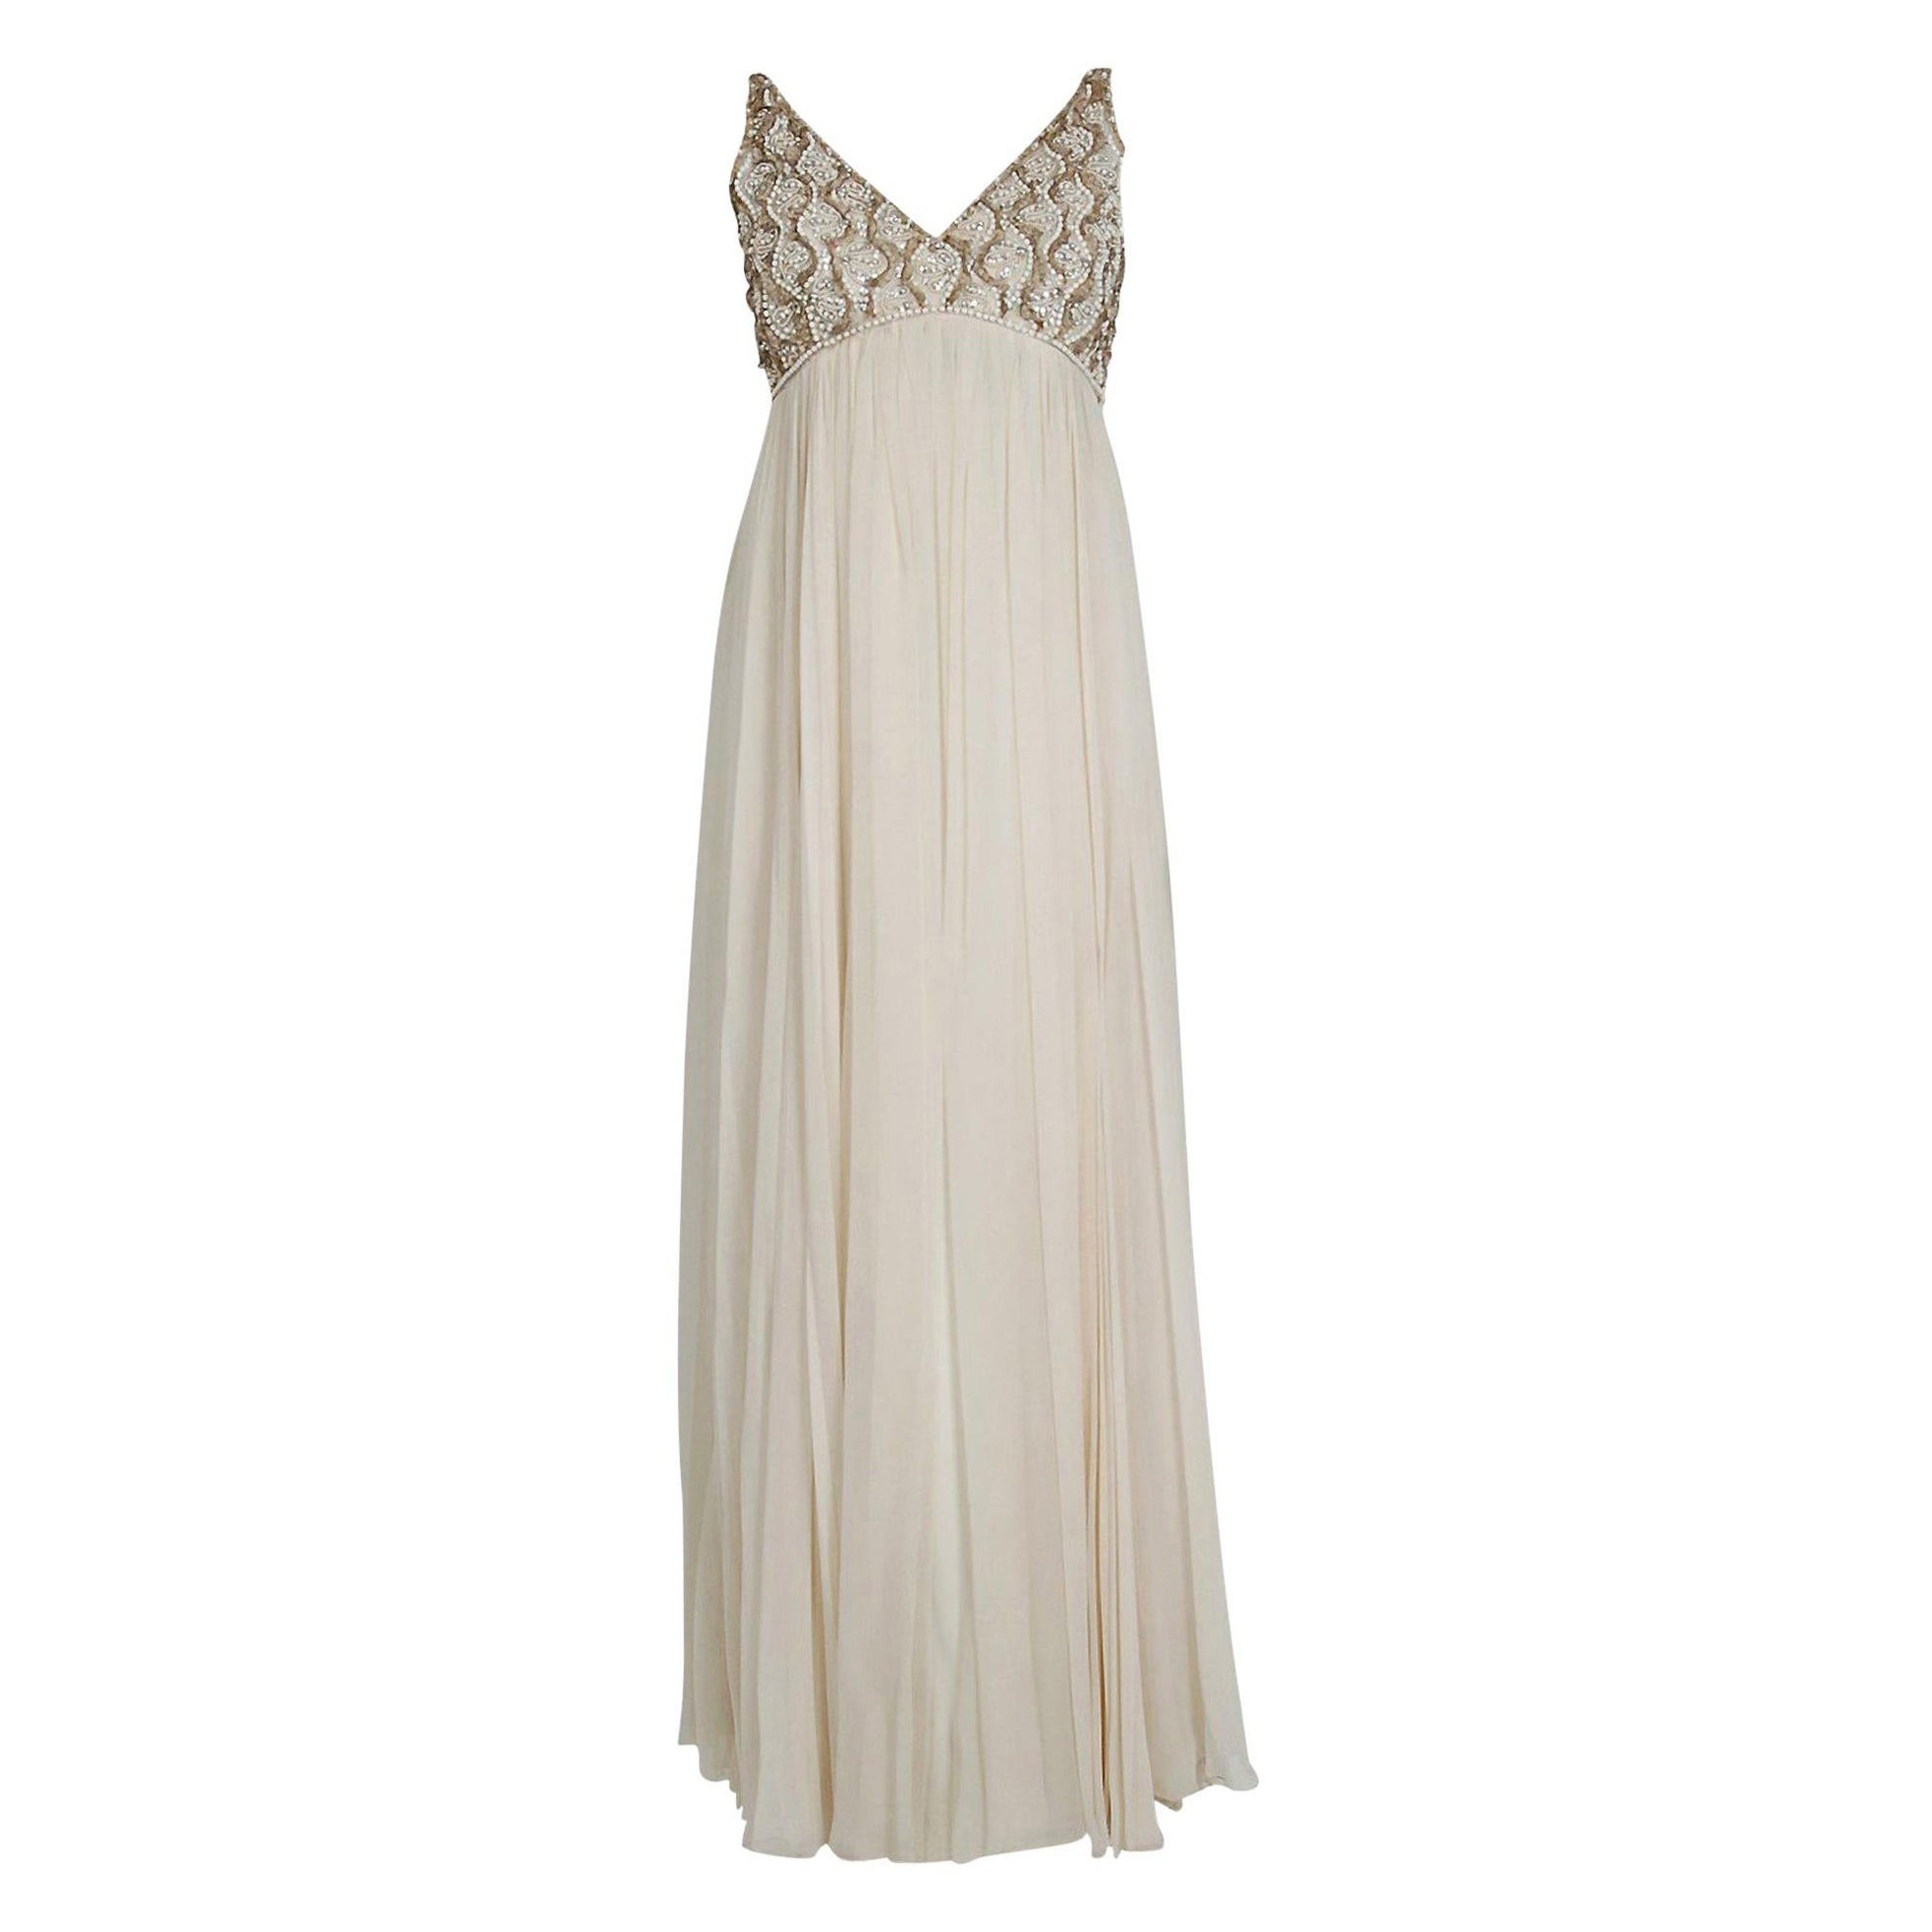 Vintage 1960's Malcolm Starr Beaded Ivory Chiffon Empire Goddess Bridal Gown For Sale